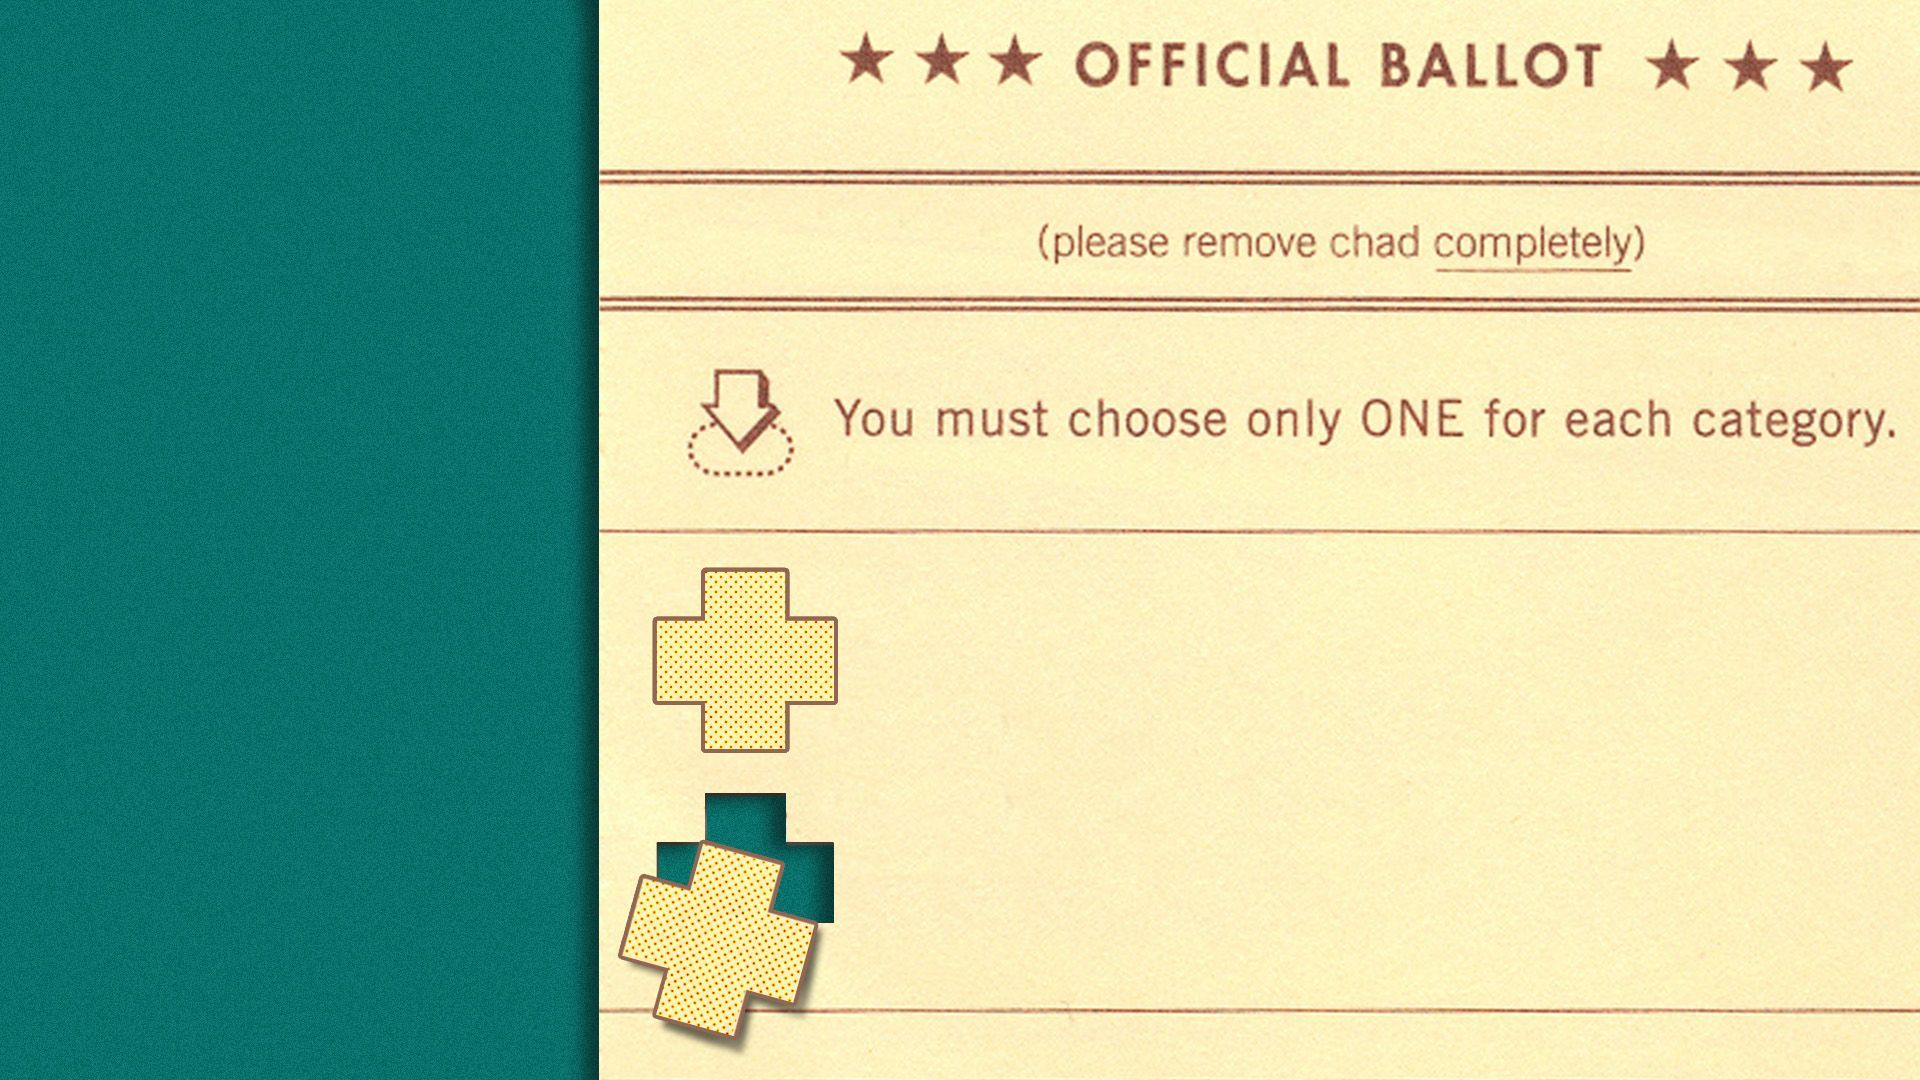 Illustration of a ballot with chads in the shape of red crosses